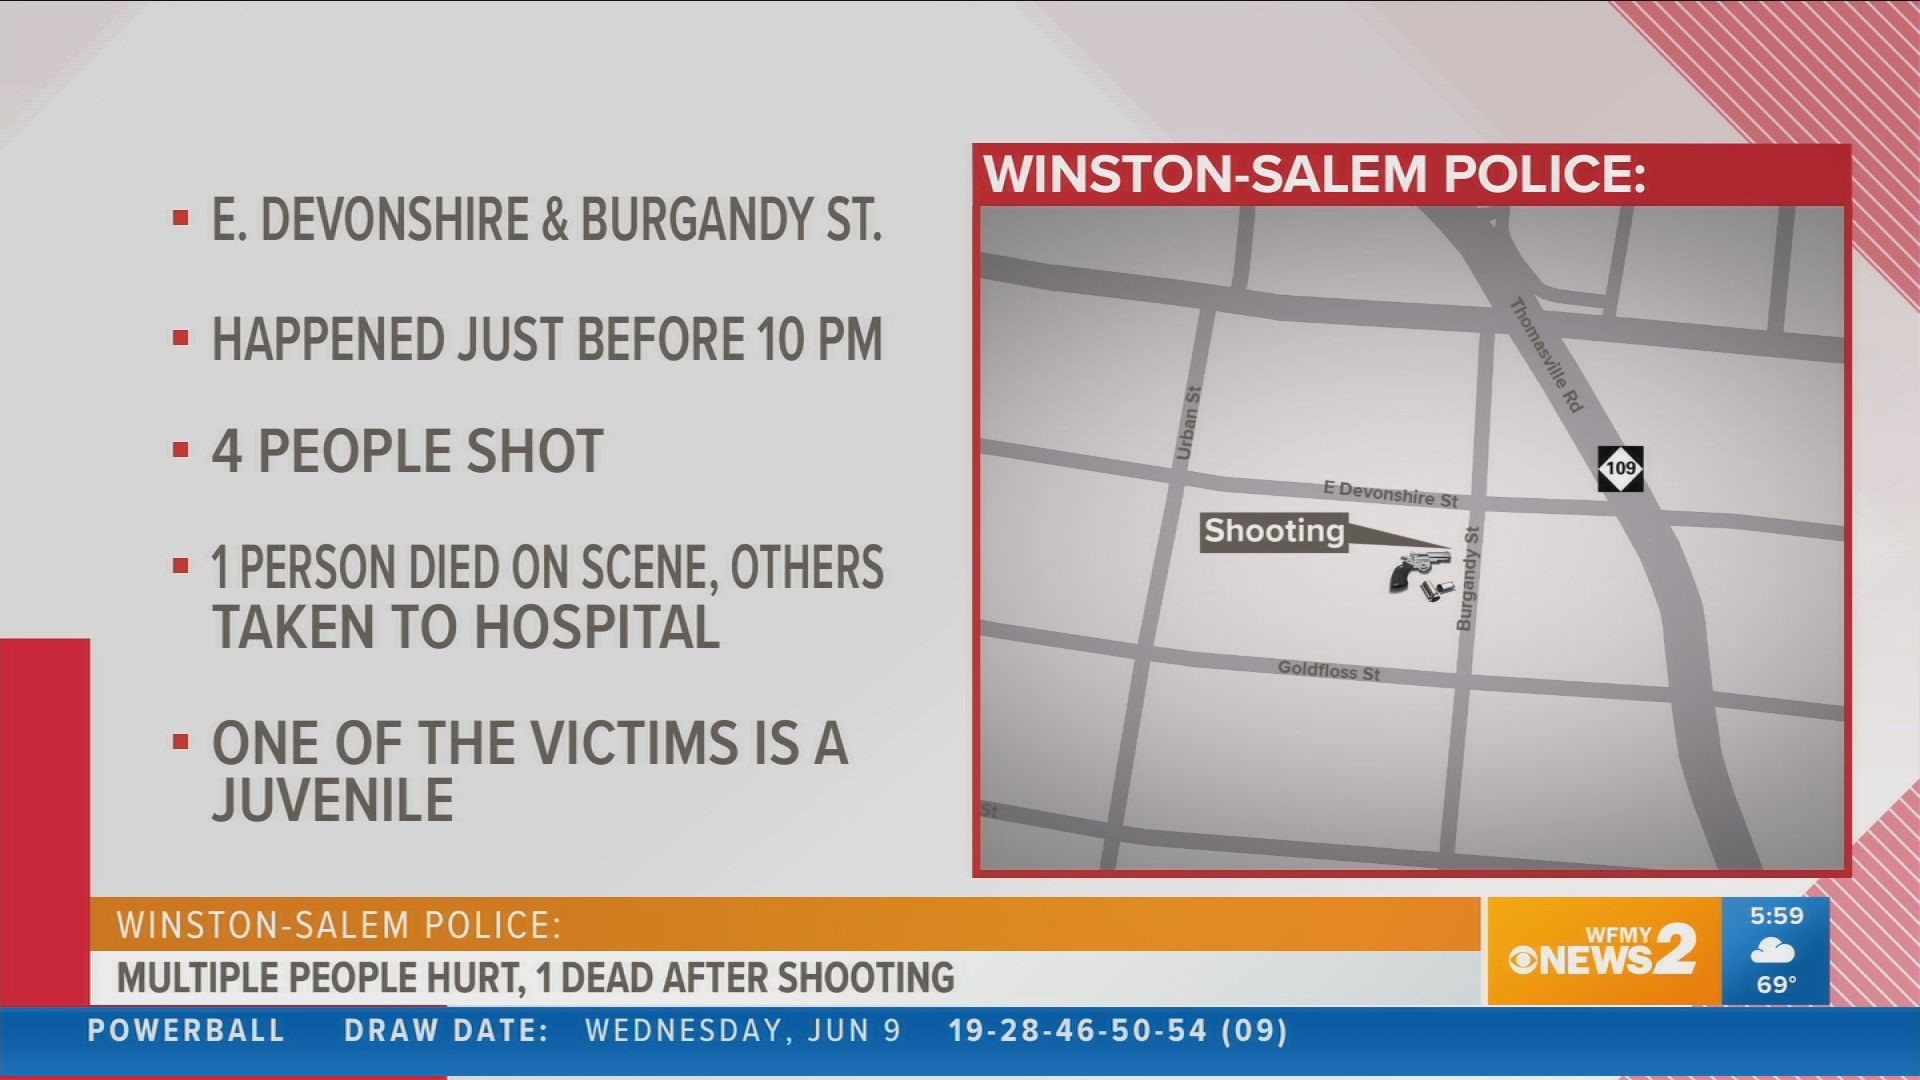 Winston-Salem Police said officers were patrolling near E. Devonshire Street when they heard gunfire and found four people shot near the scene.